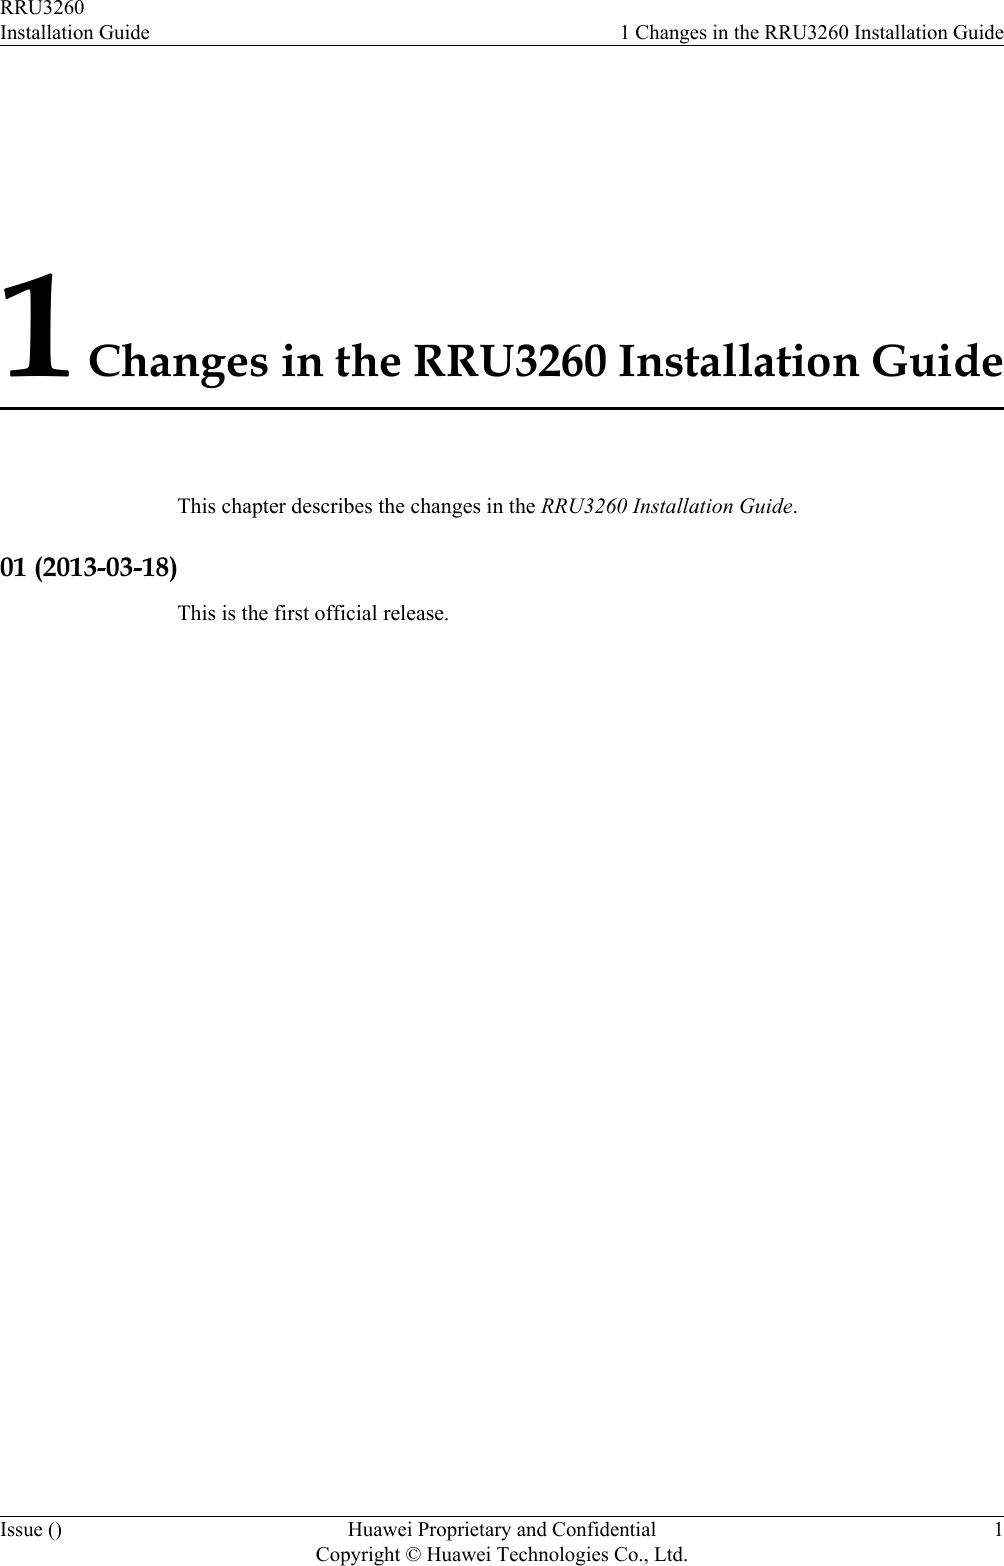 1 Changes in the RRU3260 Installation GuideThis chapter describes the changes in the RRU3260 Installation Guide.01 (2013-03-18)This is the first official release.RRU3260Installation Guide 1 Changes in the RRU3260 Installation GuideIssue () Huawei Proprietary and ConfidentialCopyright © Huawei Technologies Co., Ltd.1